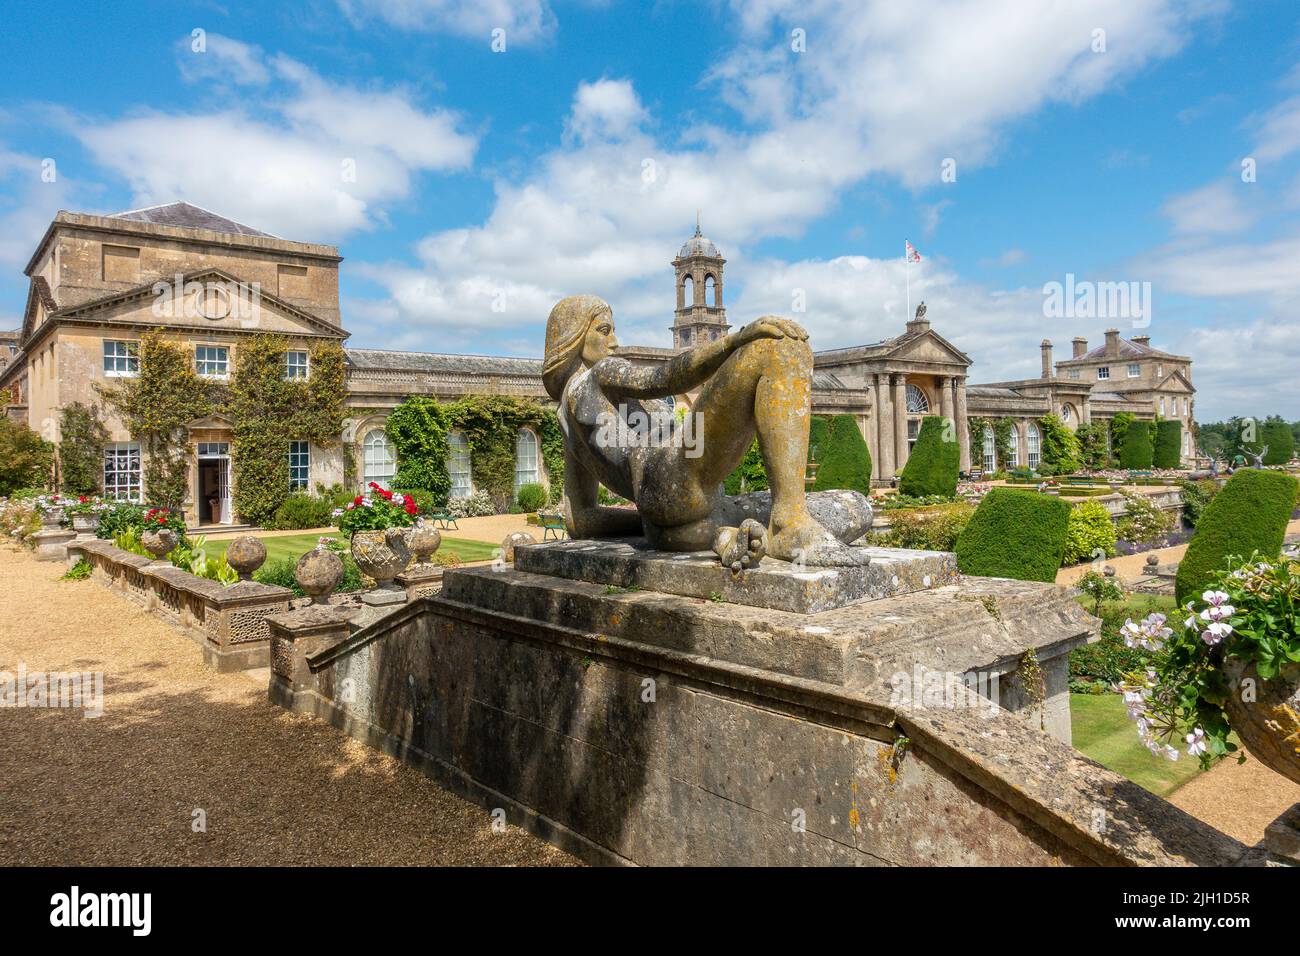 Bowood House,Reclining Nude Female,Sculpture,Formal.Gardens,Fountain,Wiltshire,UK Stock Photo